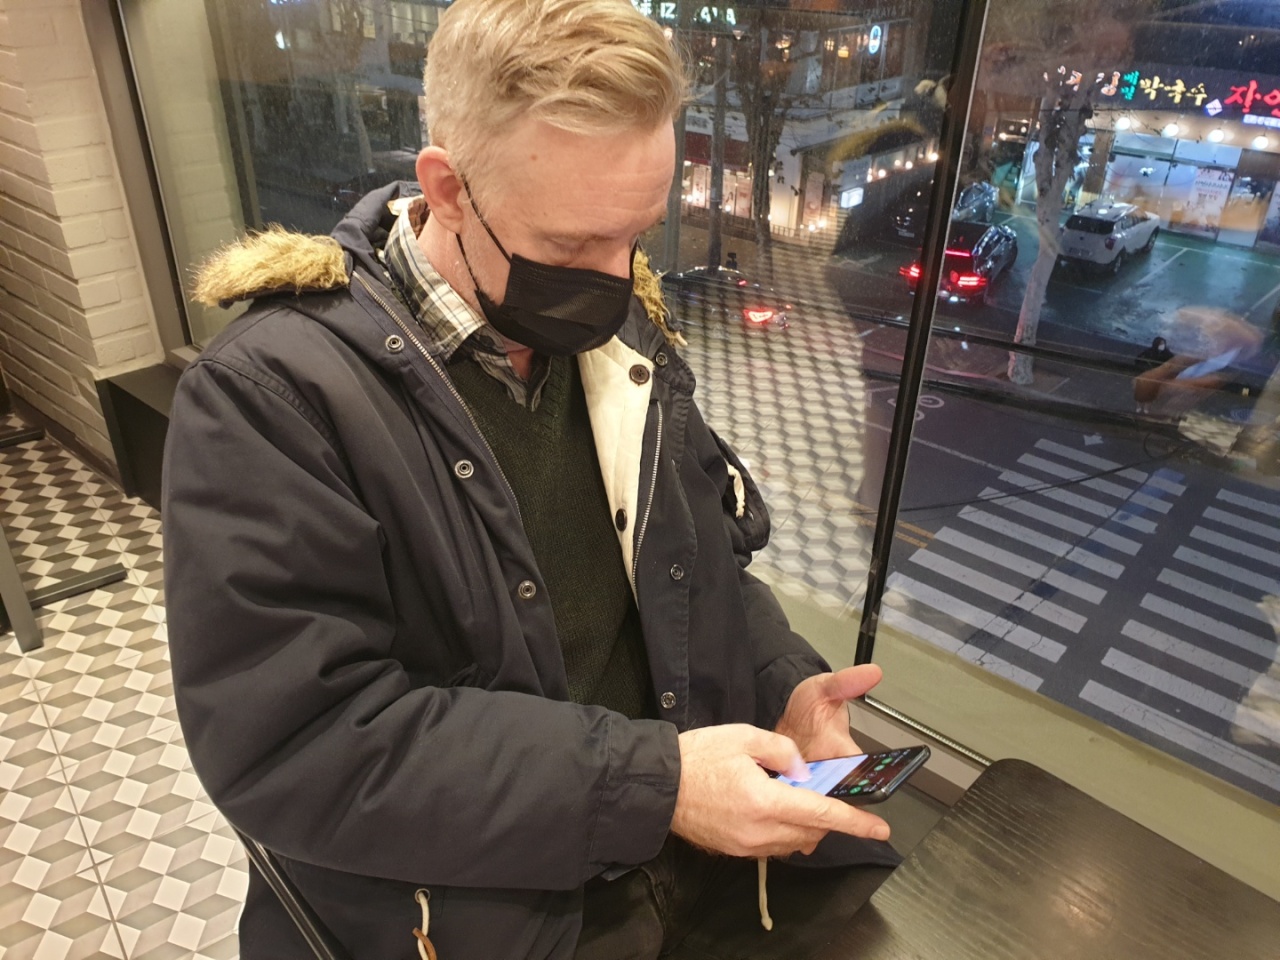 Hiram Piskitel, a 40-year-old American IT project manager at an international company located in Seoul, tries to open a bank account on Toss Bank’s mobile application. (Choi Jae-hee / The Korea Herald)